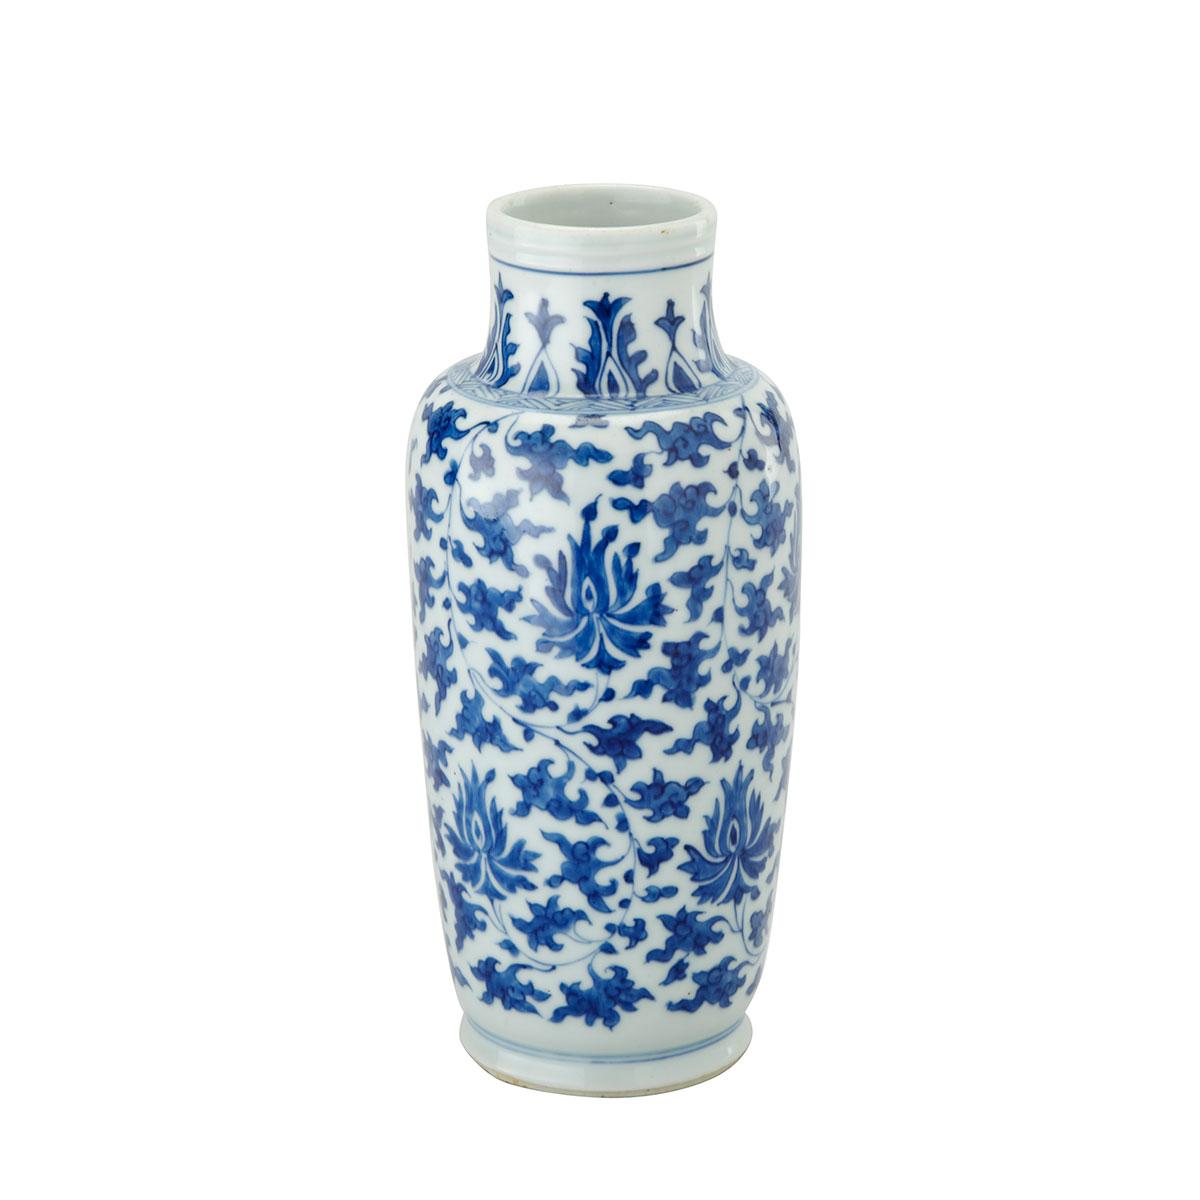 Blue and White Lotus Rouleau Vase, 18th Century